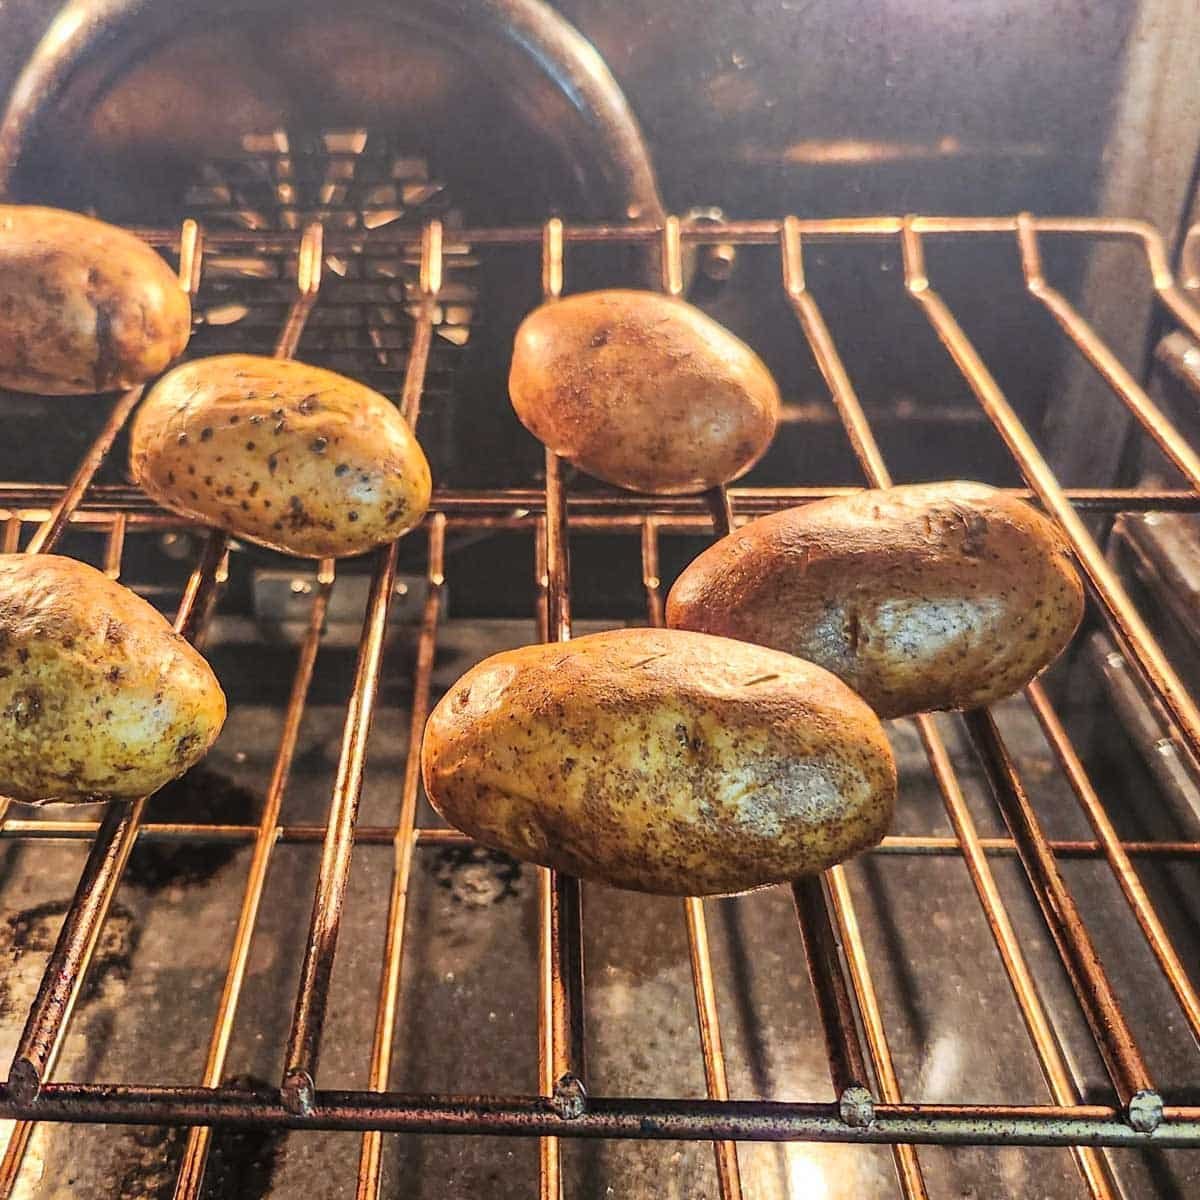 russet potatoes in the oven